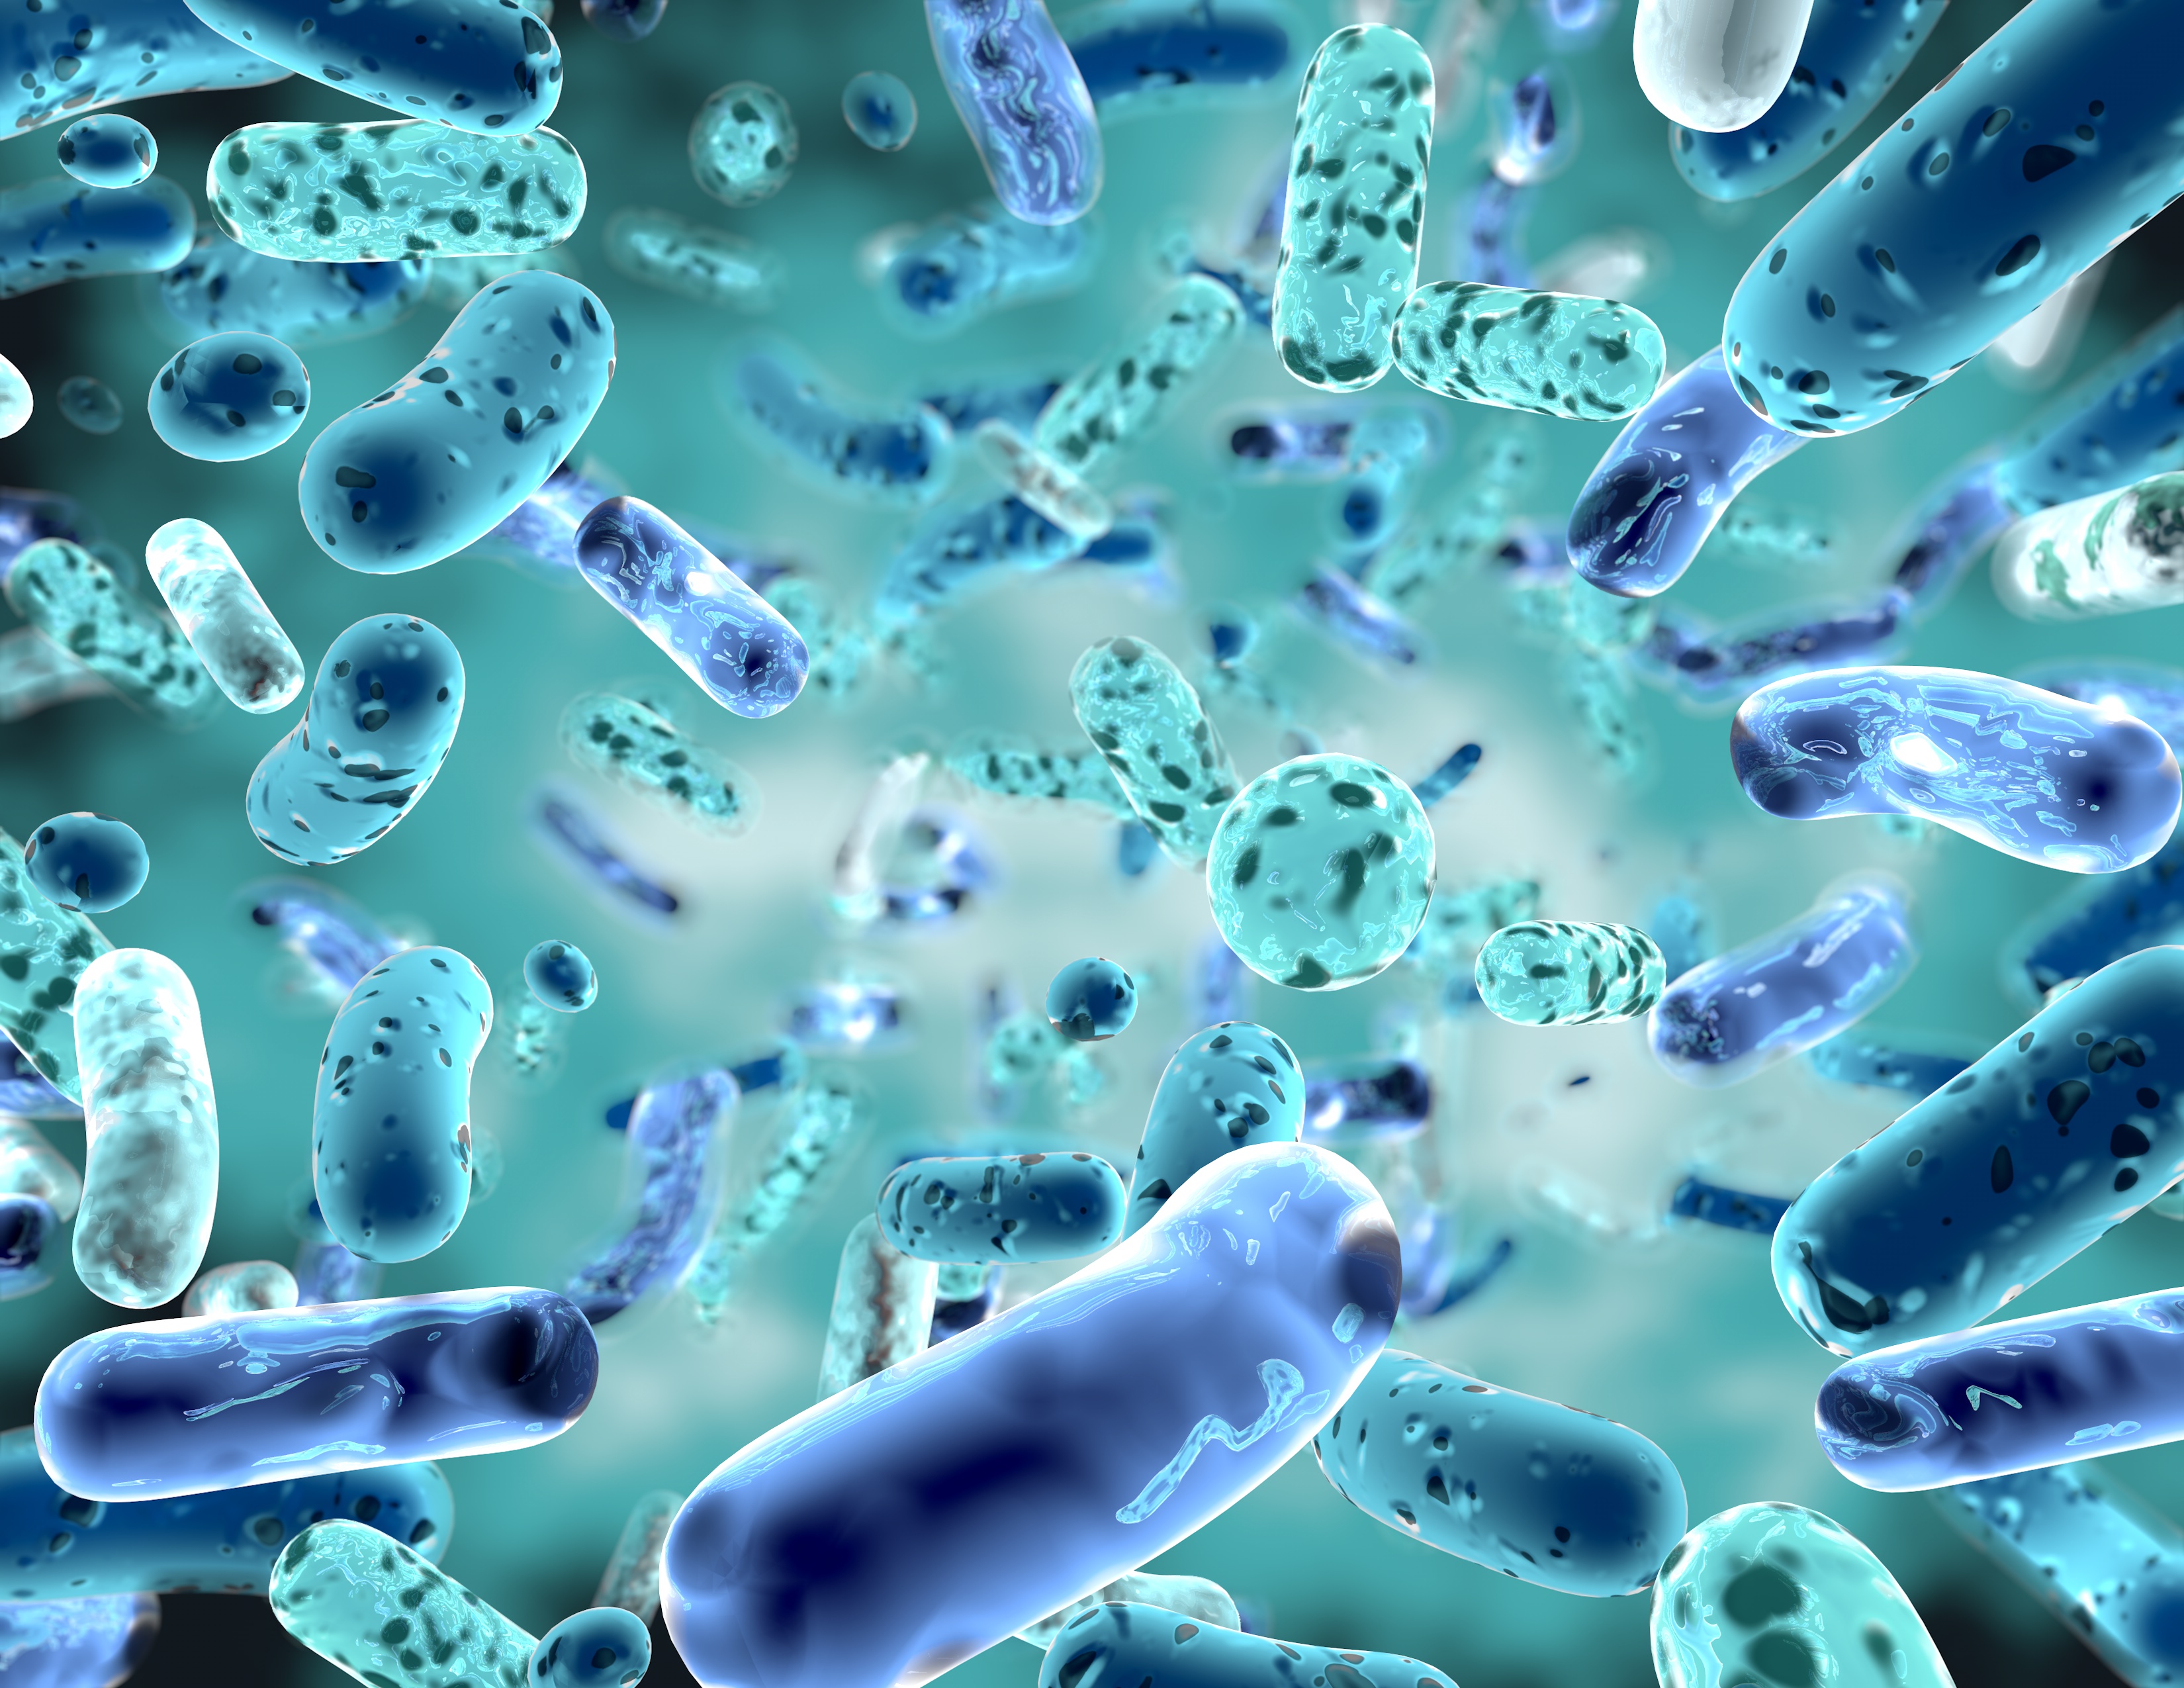 2nd Edition of Webinar on Probiotics, Gut Microbiome & Immune System